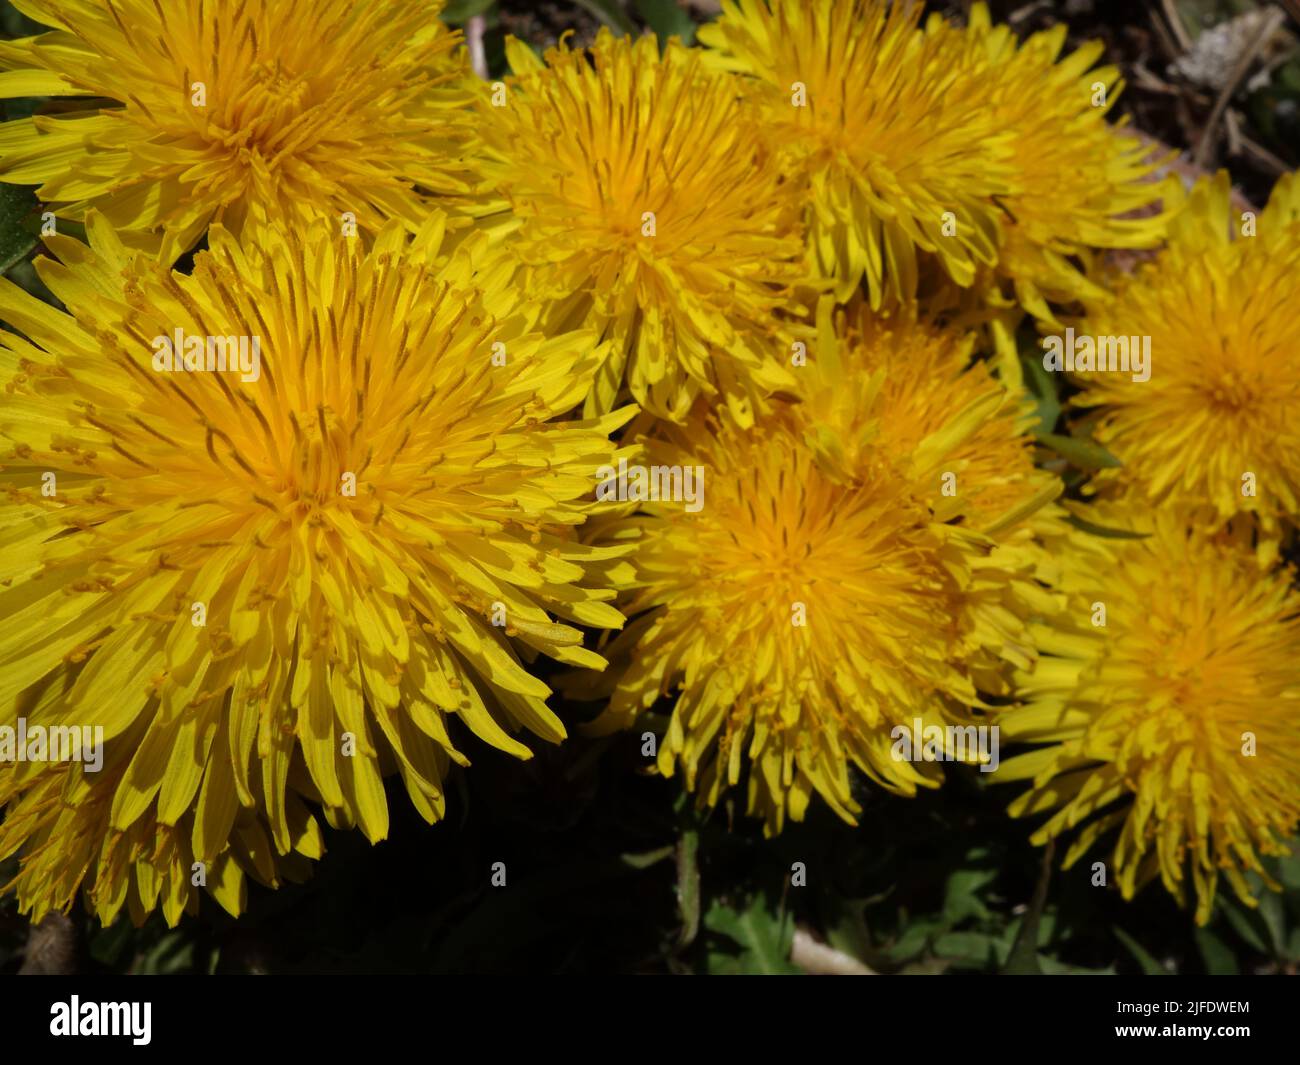 Close-up of a group of bright yellow Dandelion flowers, Taraxacum officinale. Stock Photo